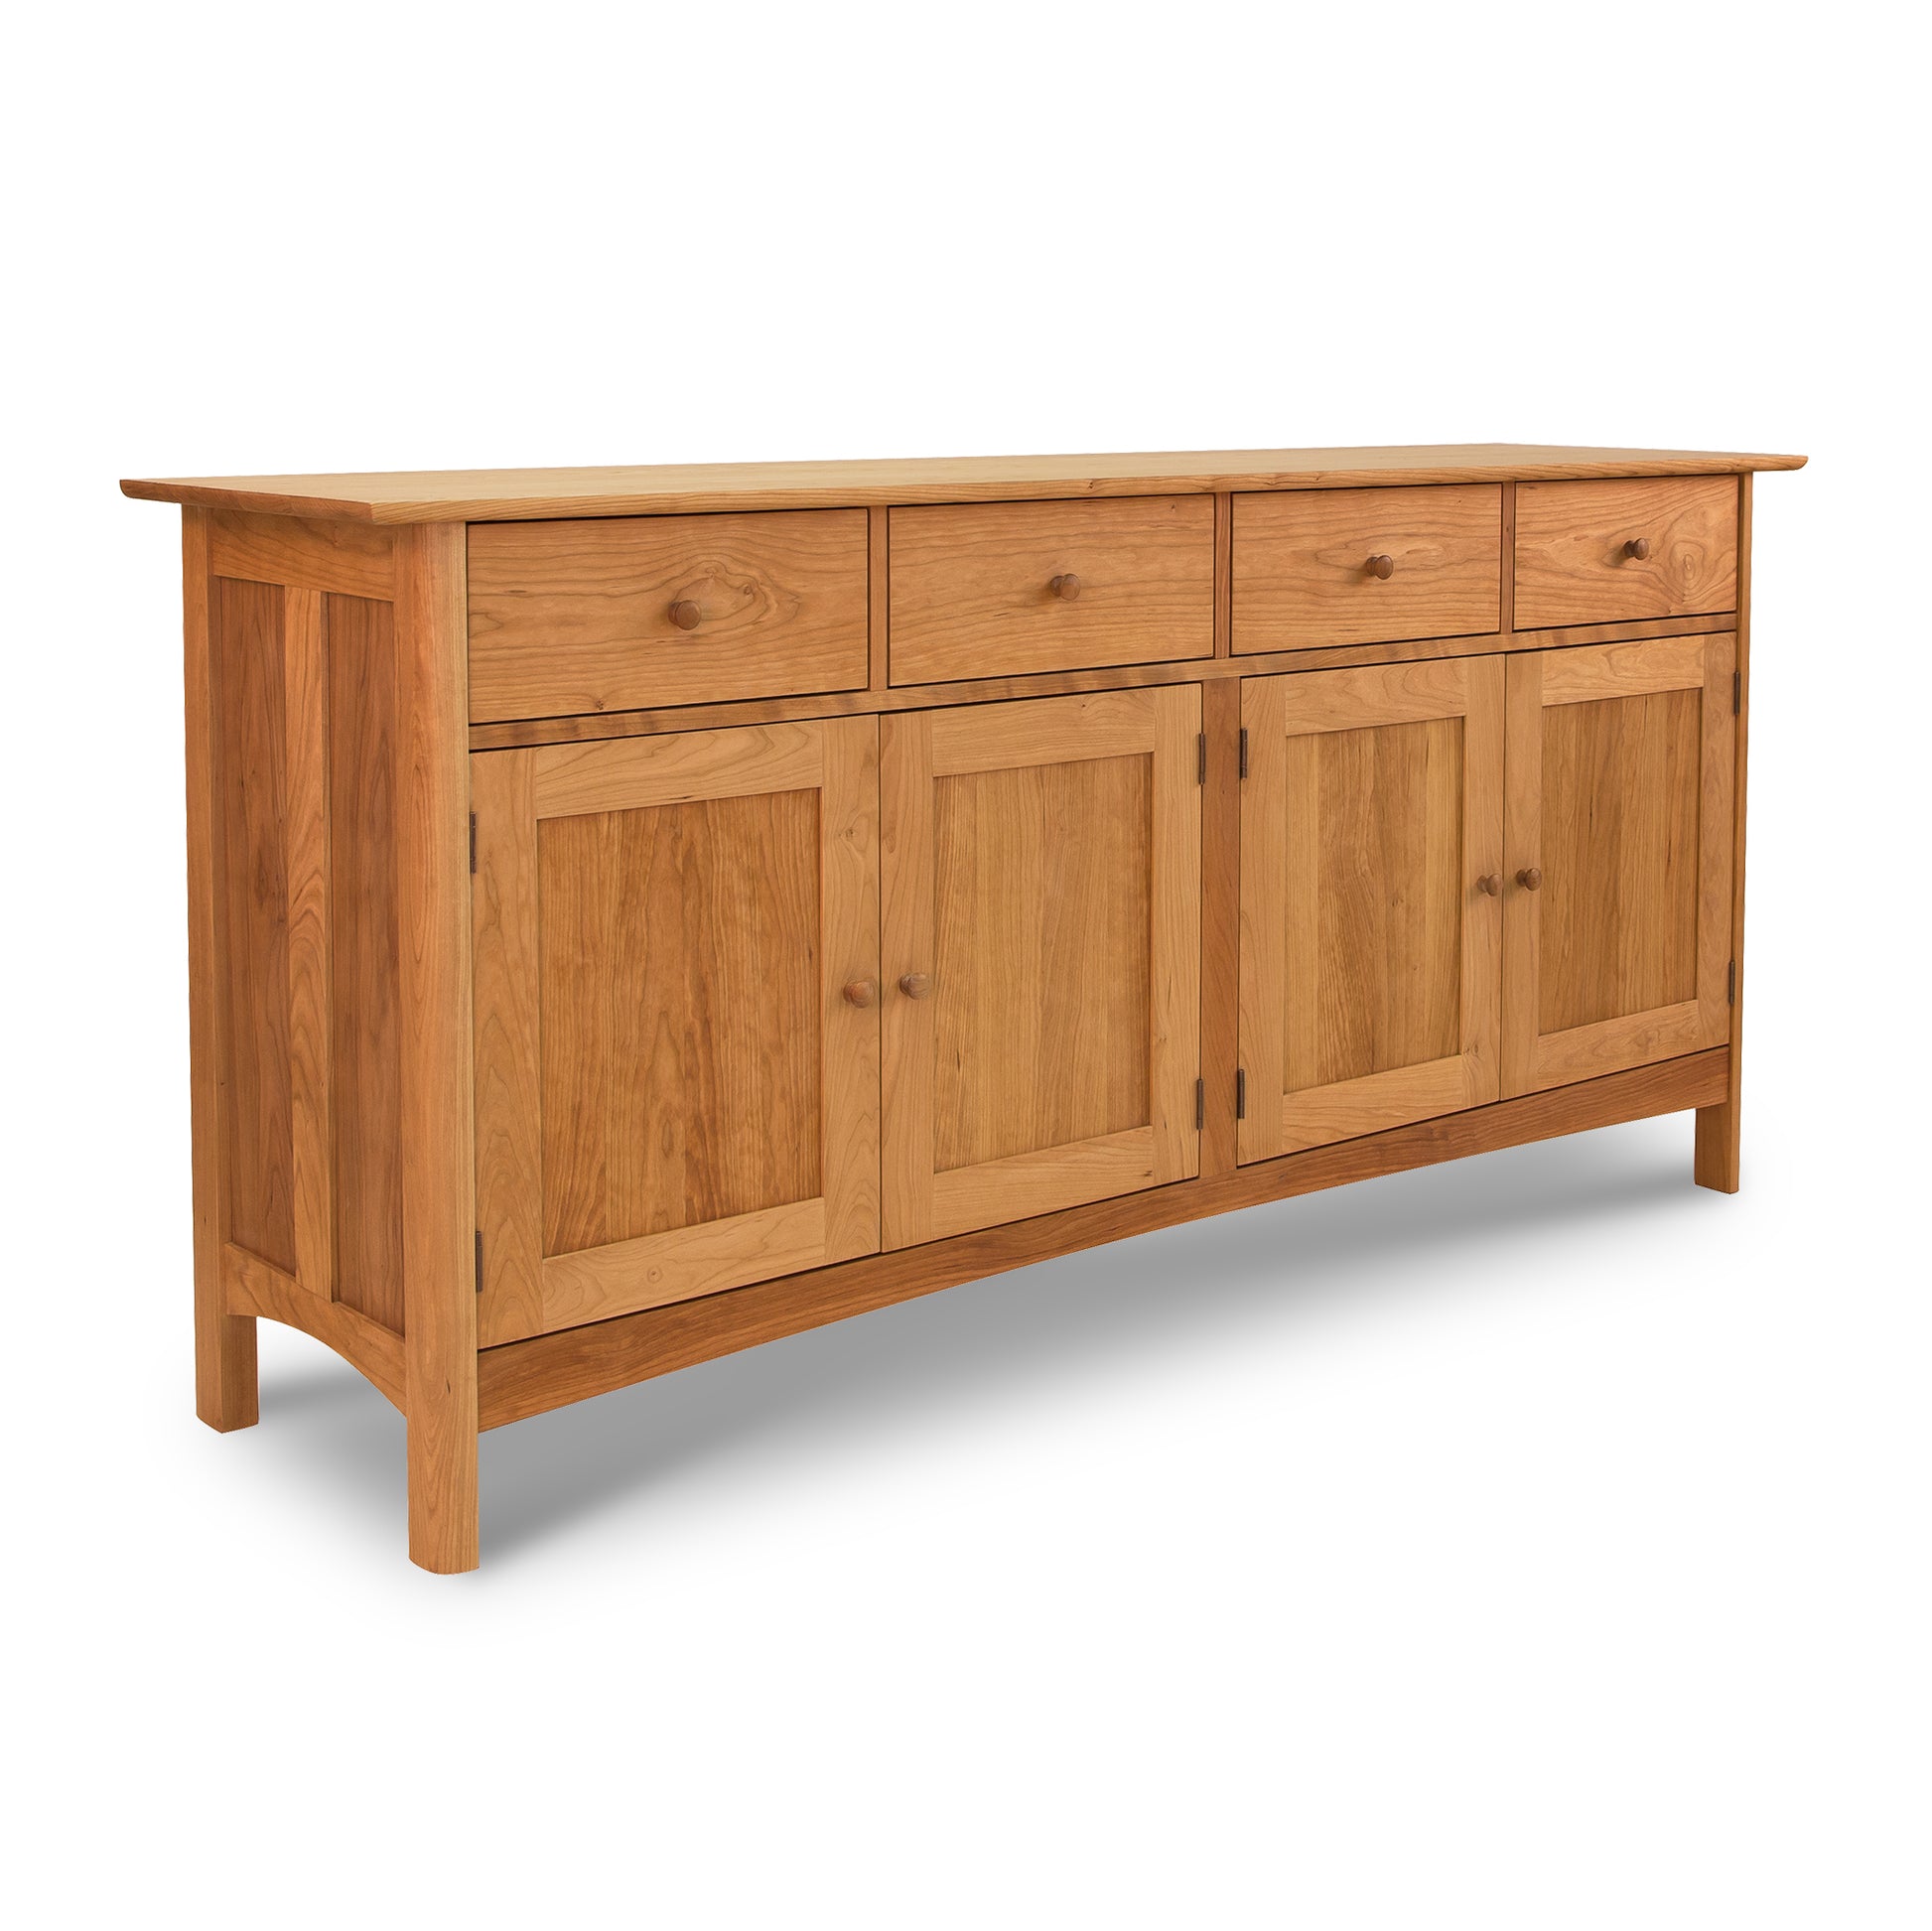 Heartwood Shaker Long Sideboard with three drawers and four doors on a white background, perfect for contemporary kitchen storage by Vermont Furniture Designs.